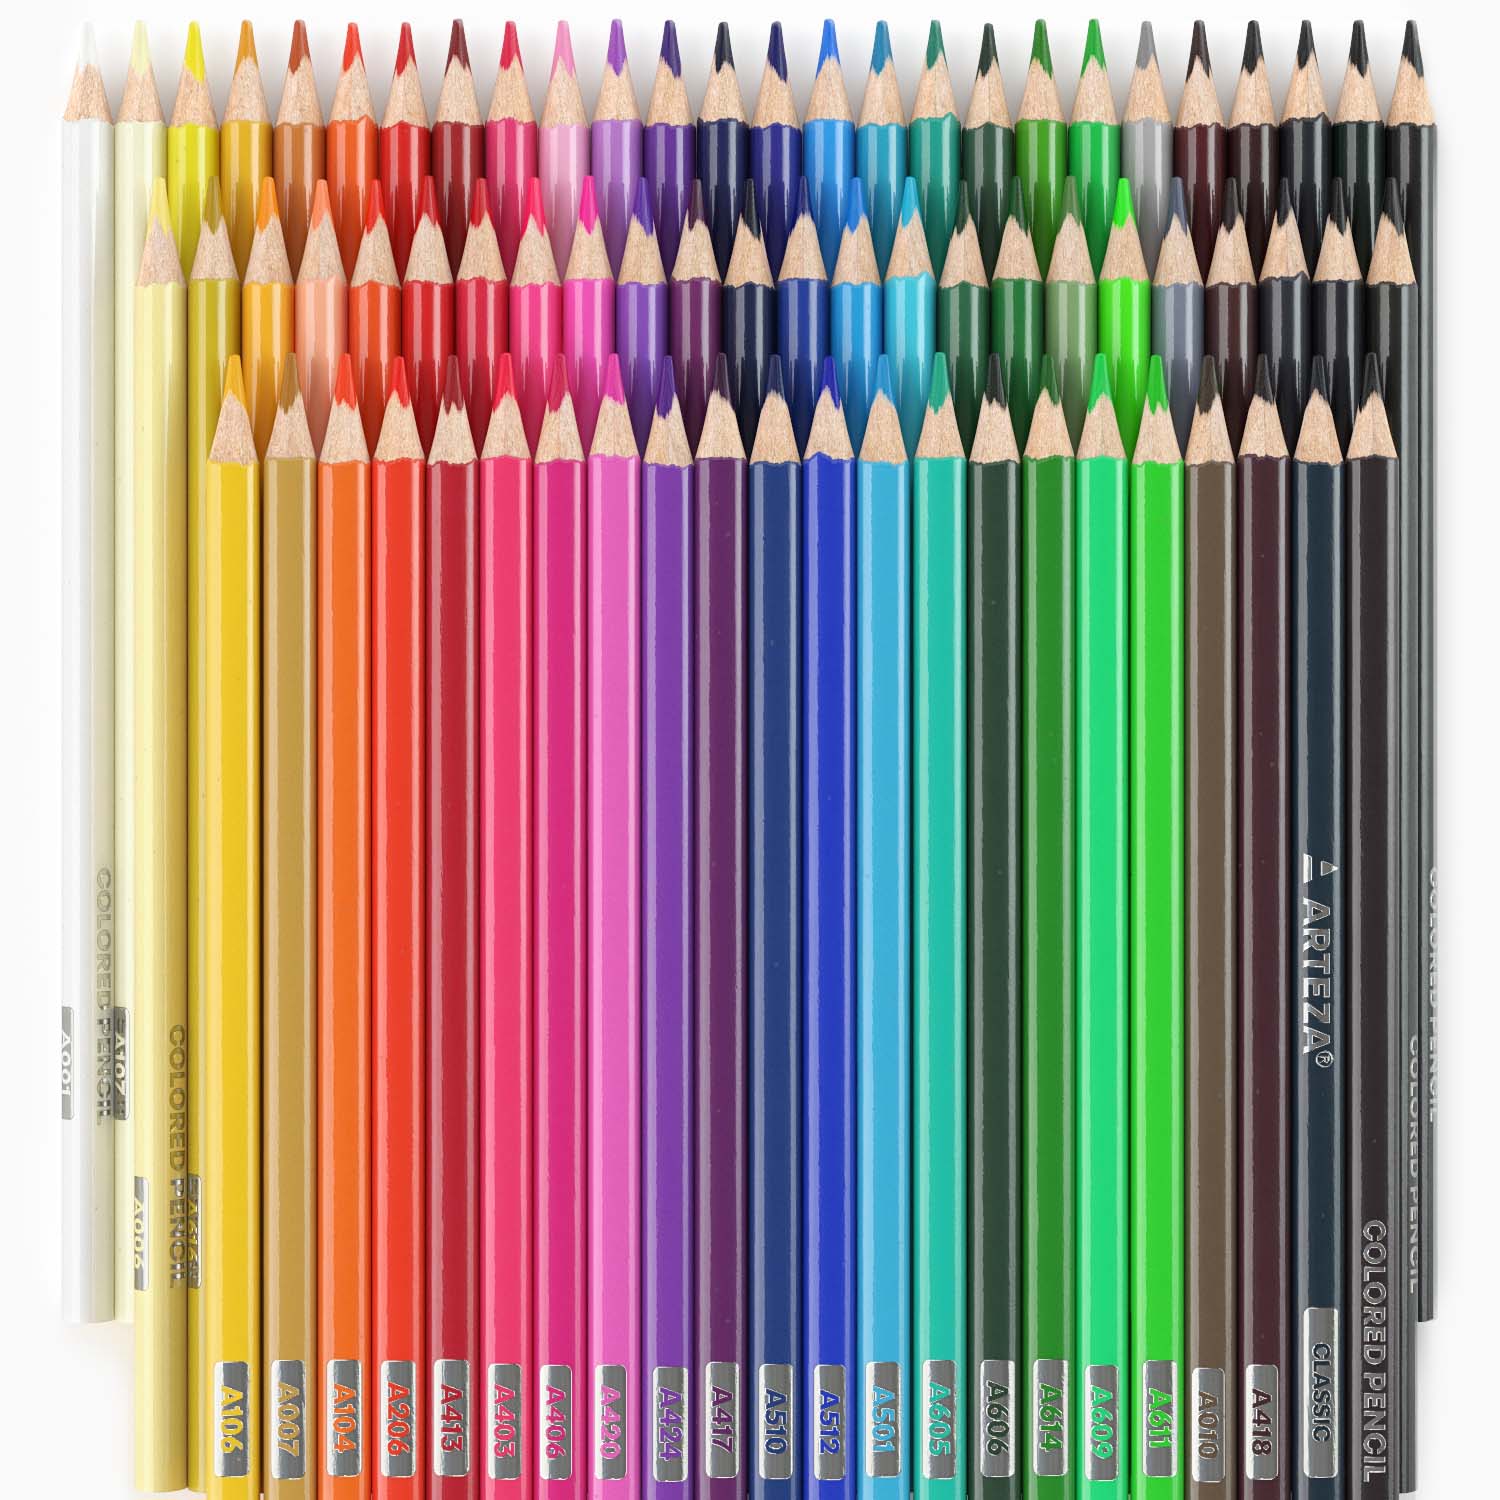 Bright Ideas Colored Pencils: (Colored Pencils for Adults and Kids, Coloring  Pencils for Coloring Books, Drawing Pencils) (Kit)